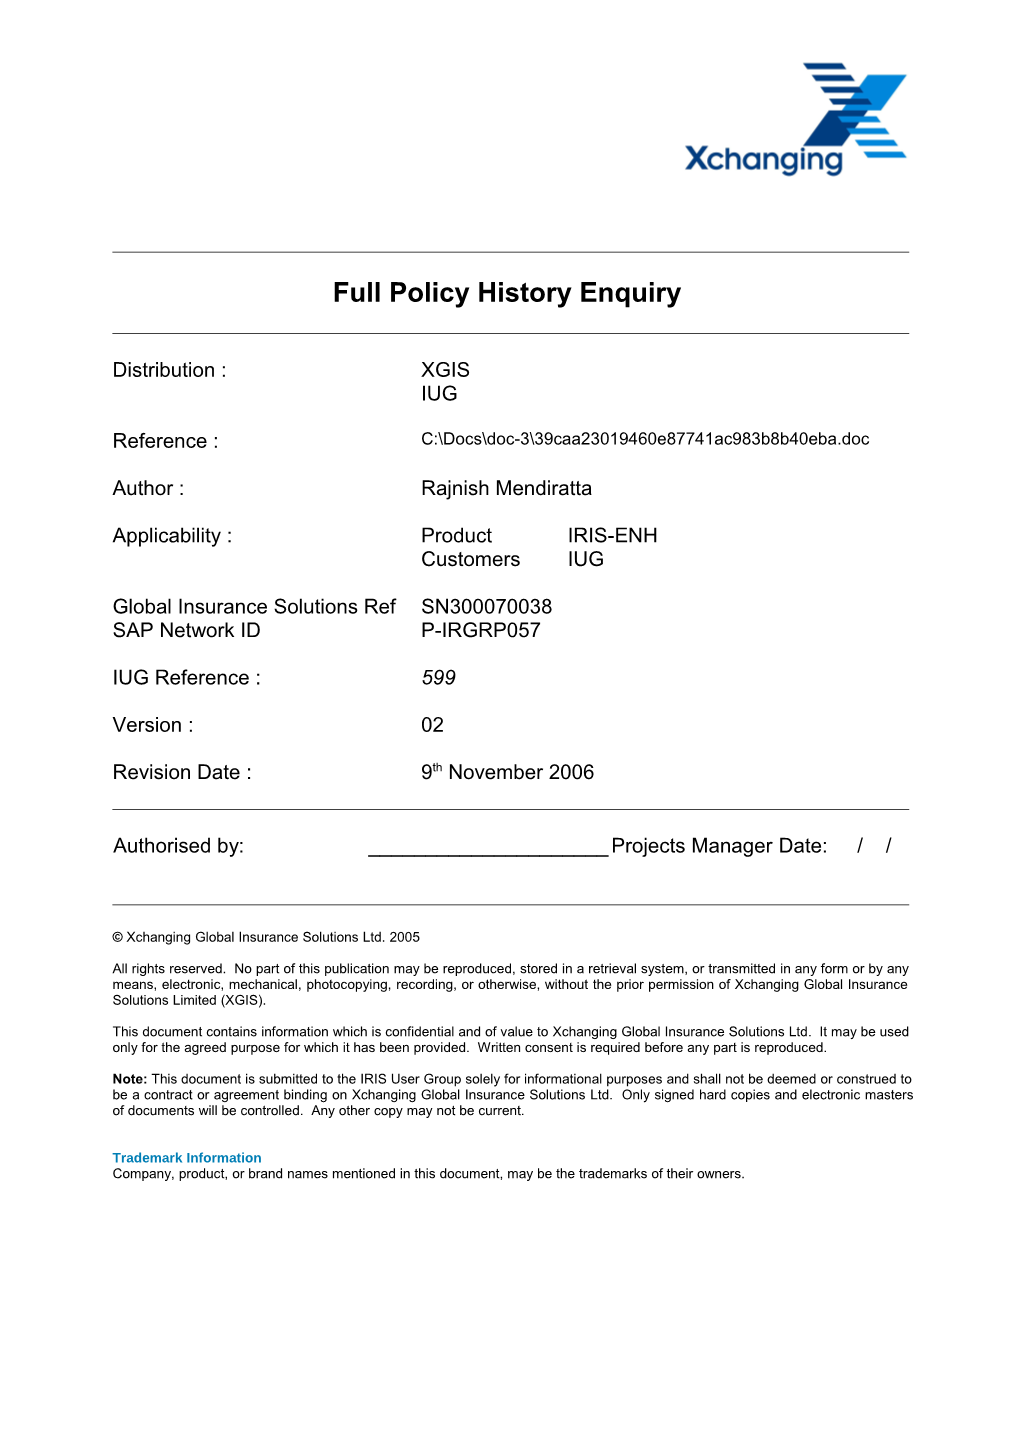 Full Policy History Enquiry